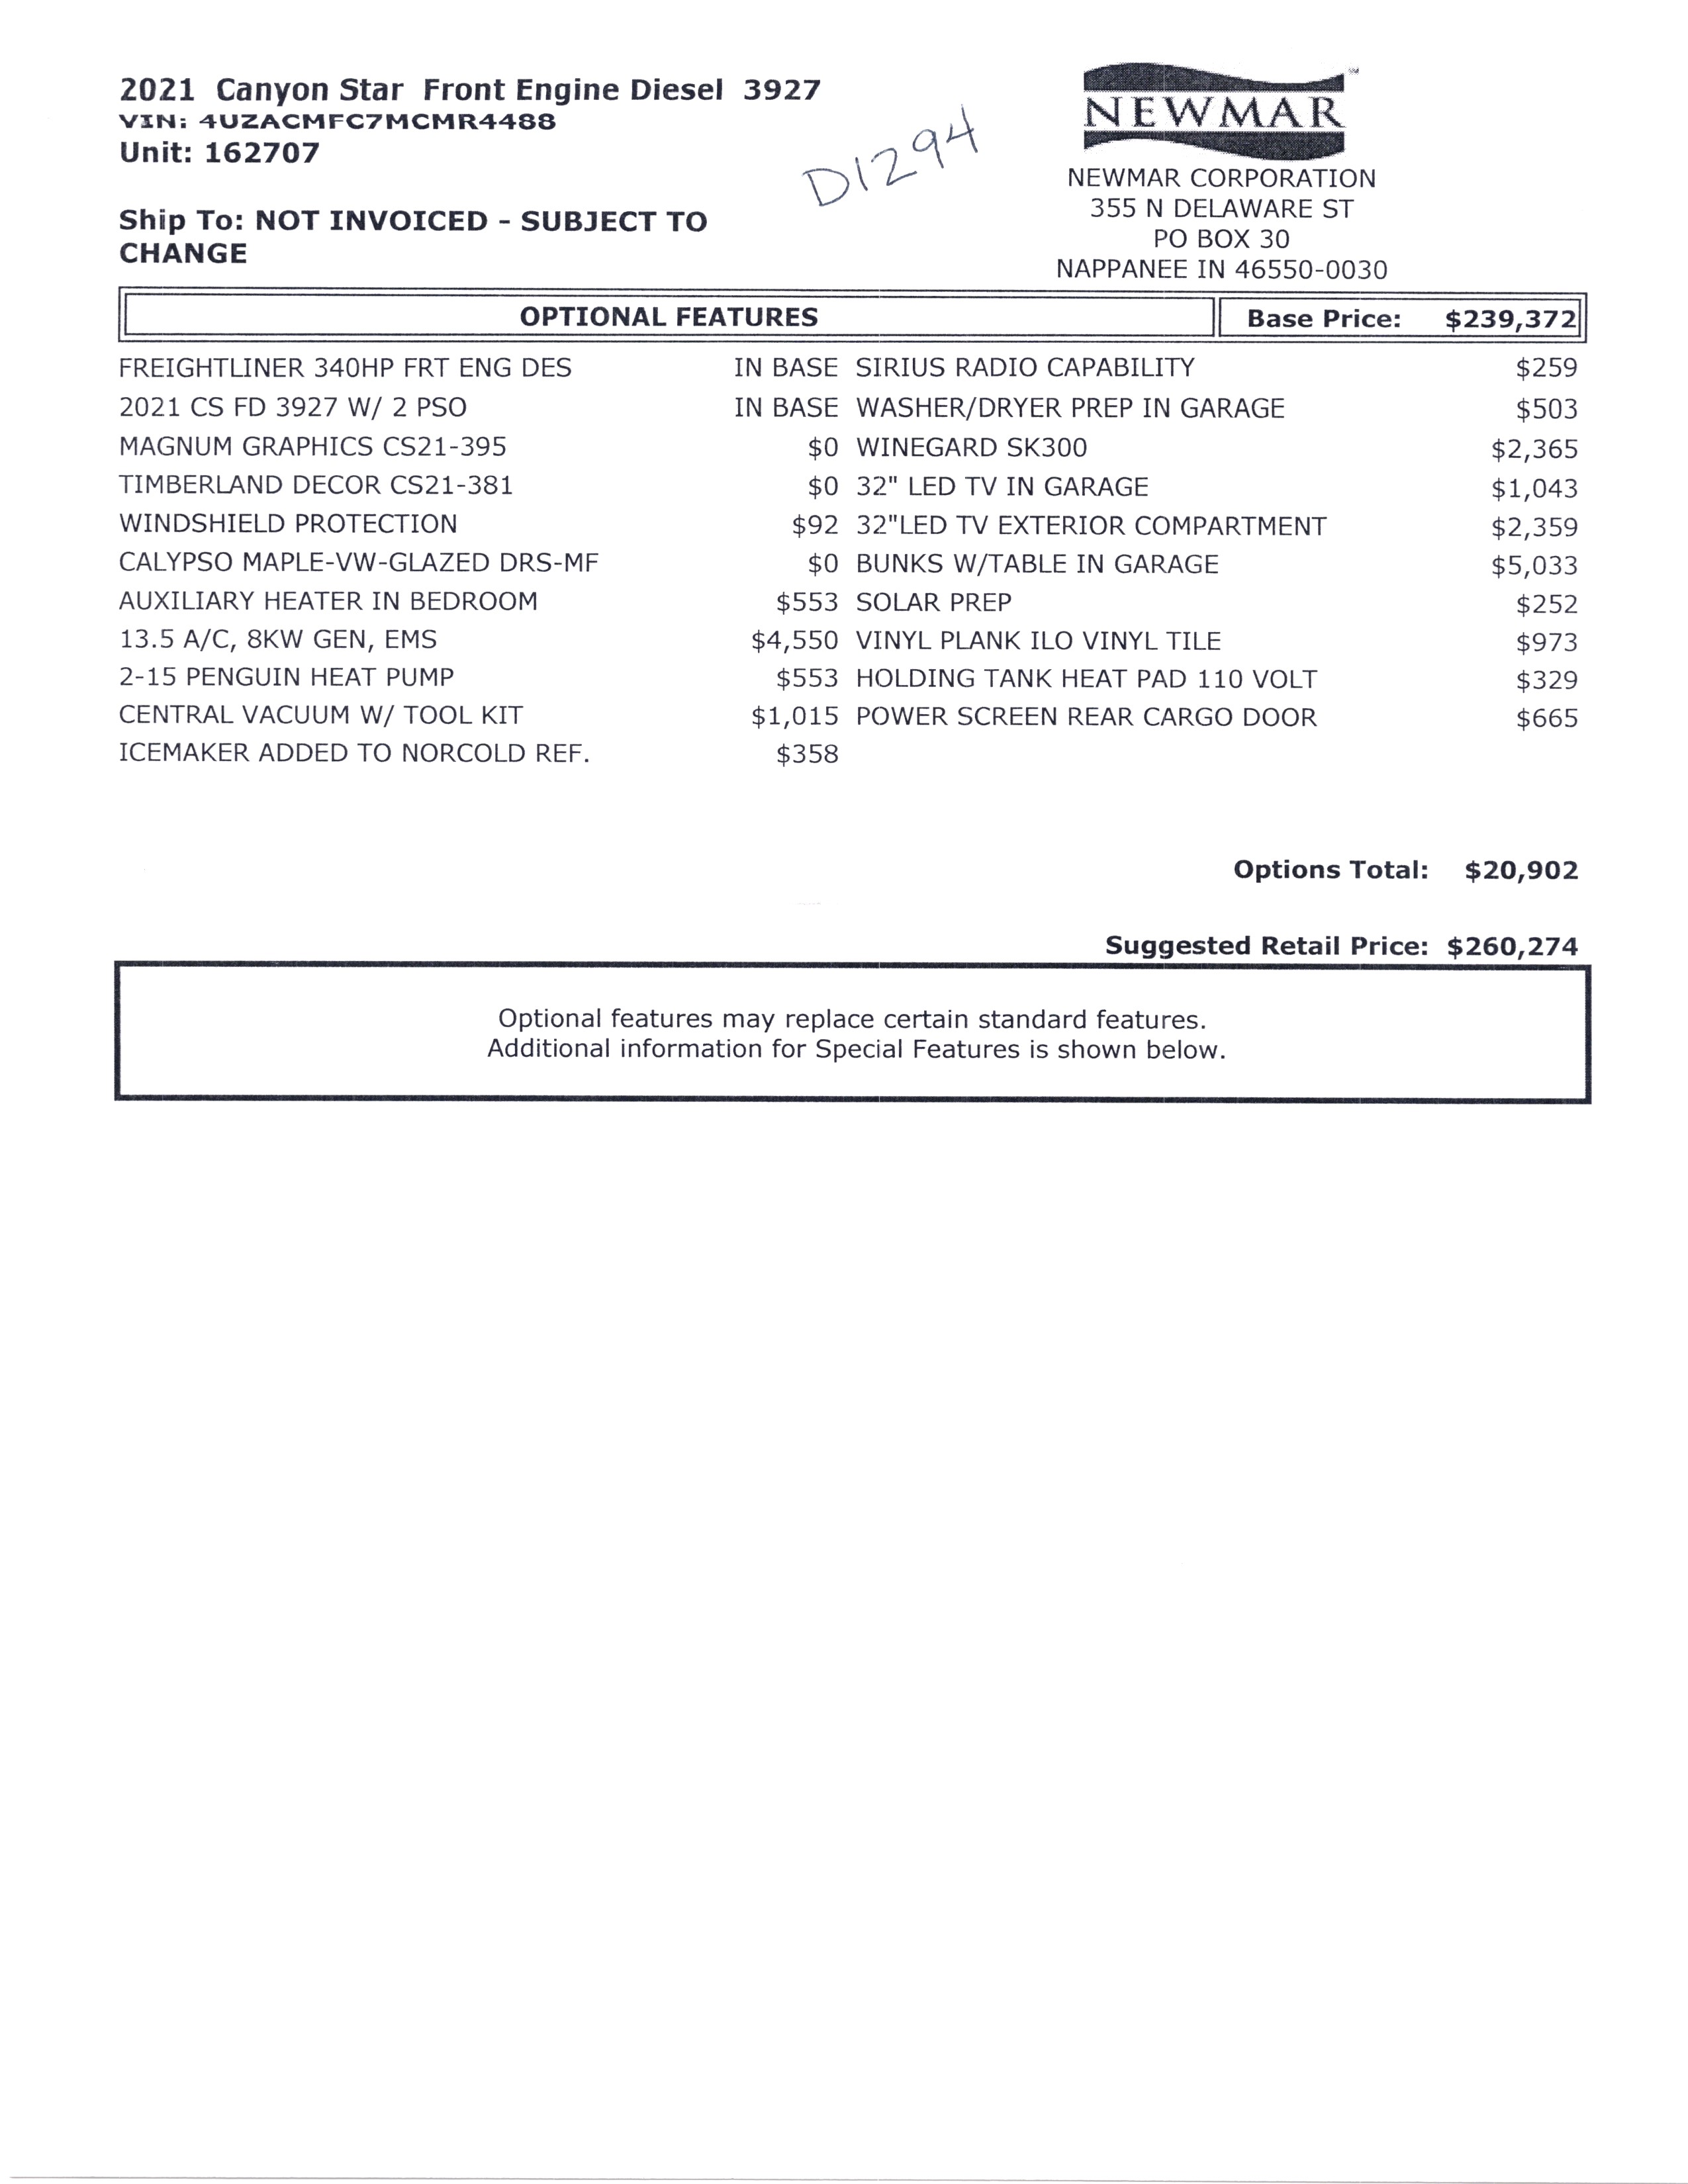 2021 Newmar Canyon Star 3927 (Front Engine Diesel) MSRP Sheet